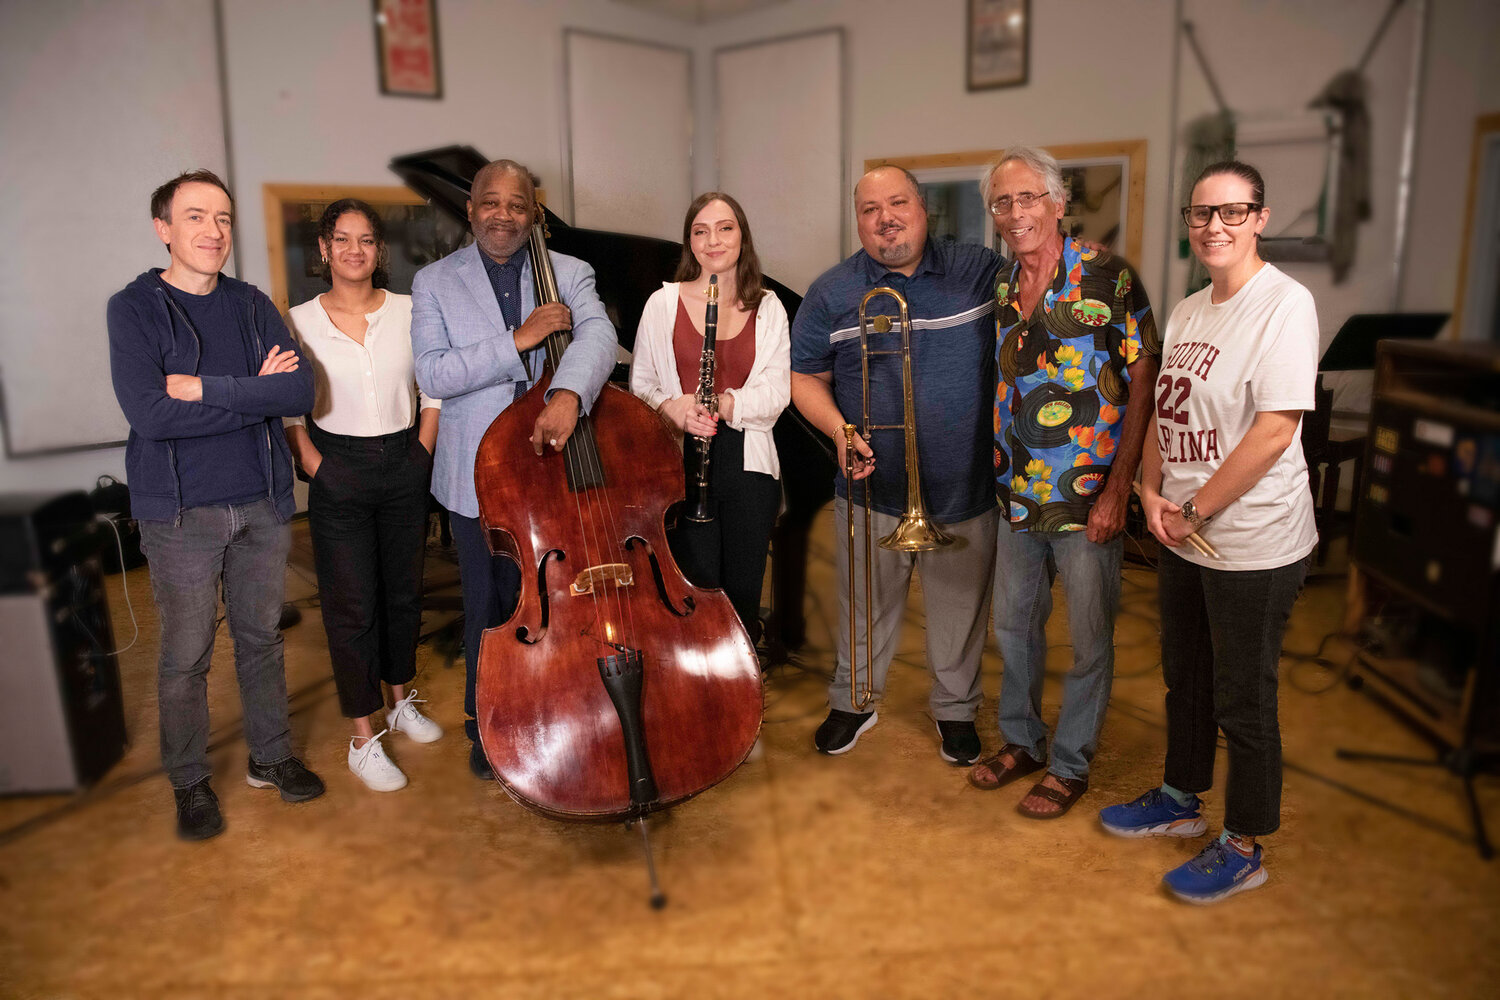 “The Other Shoe” band, left to right: Pianist Geoffrey Keezer, bassists Liany Mateo and Rodney Whitaker, clarinetist Virgina MacDonald, Dease, composer Gregg Hill and drummer Colleen Clark.